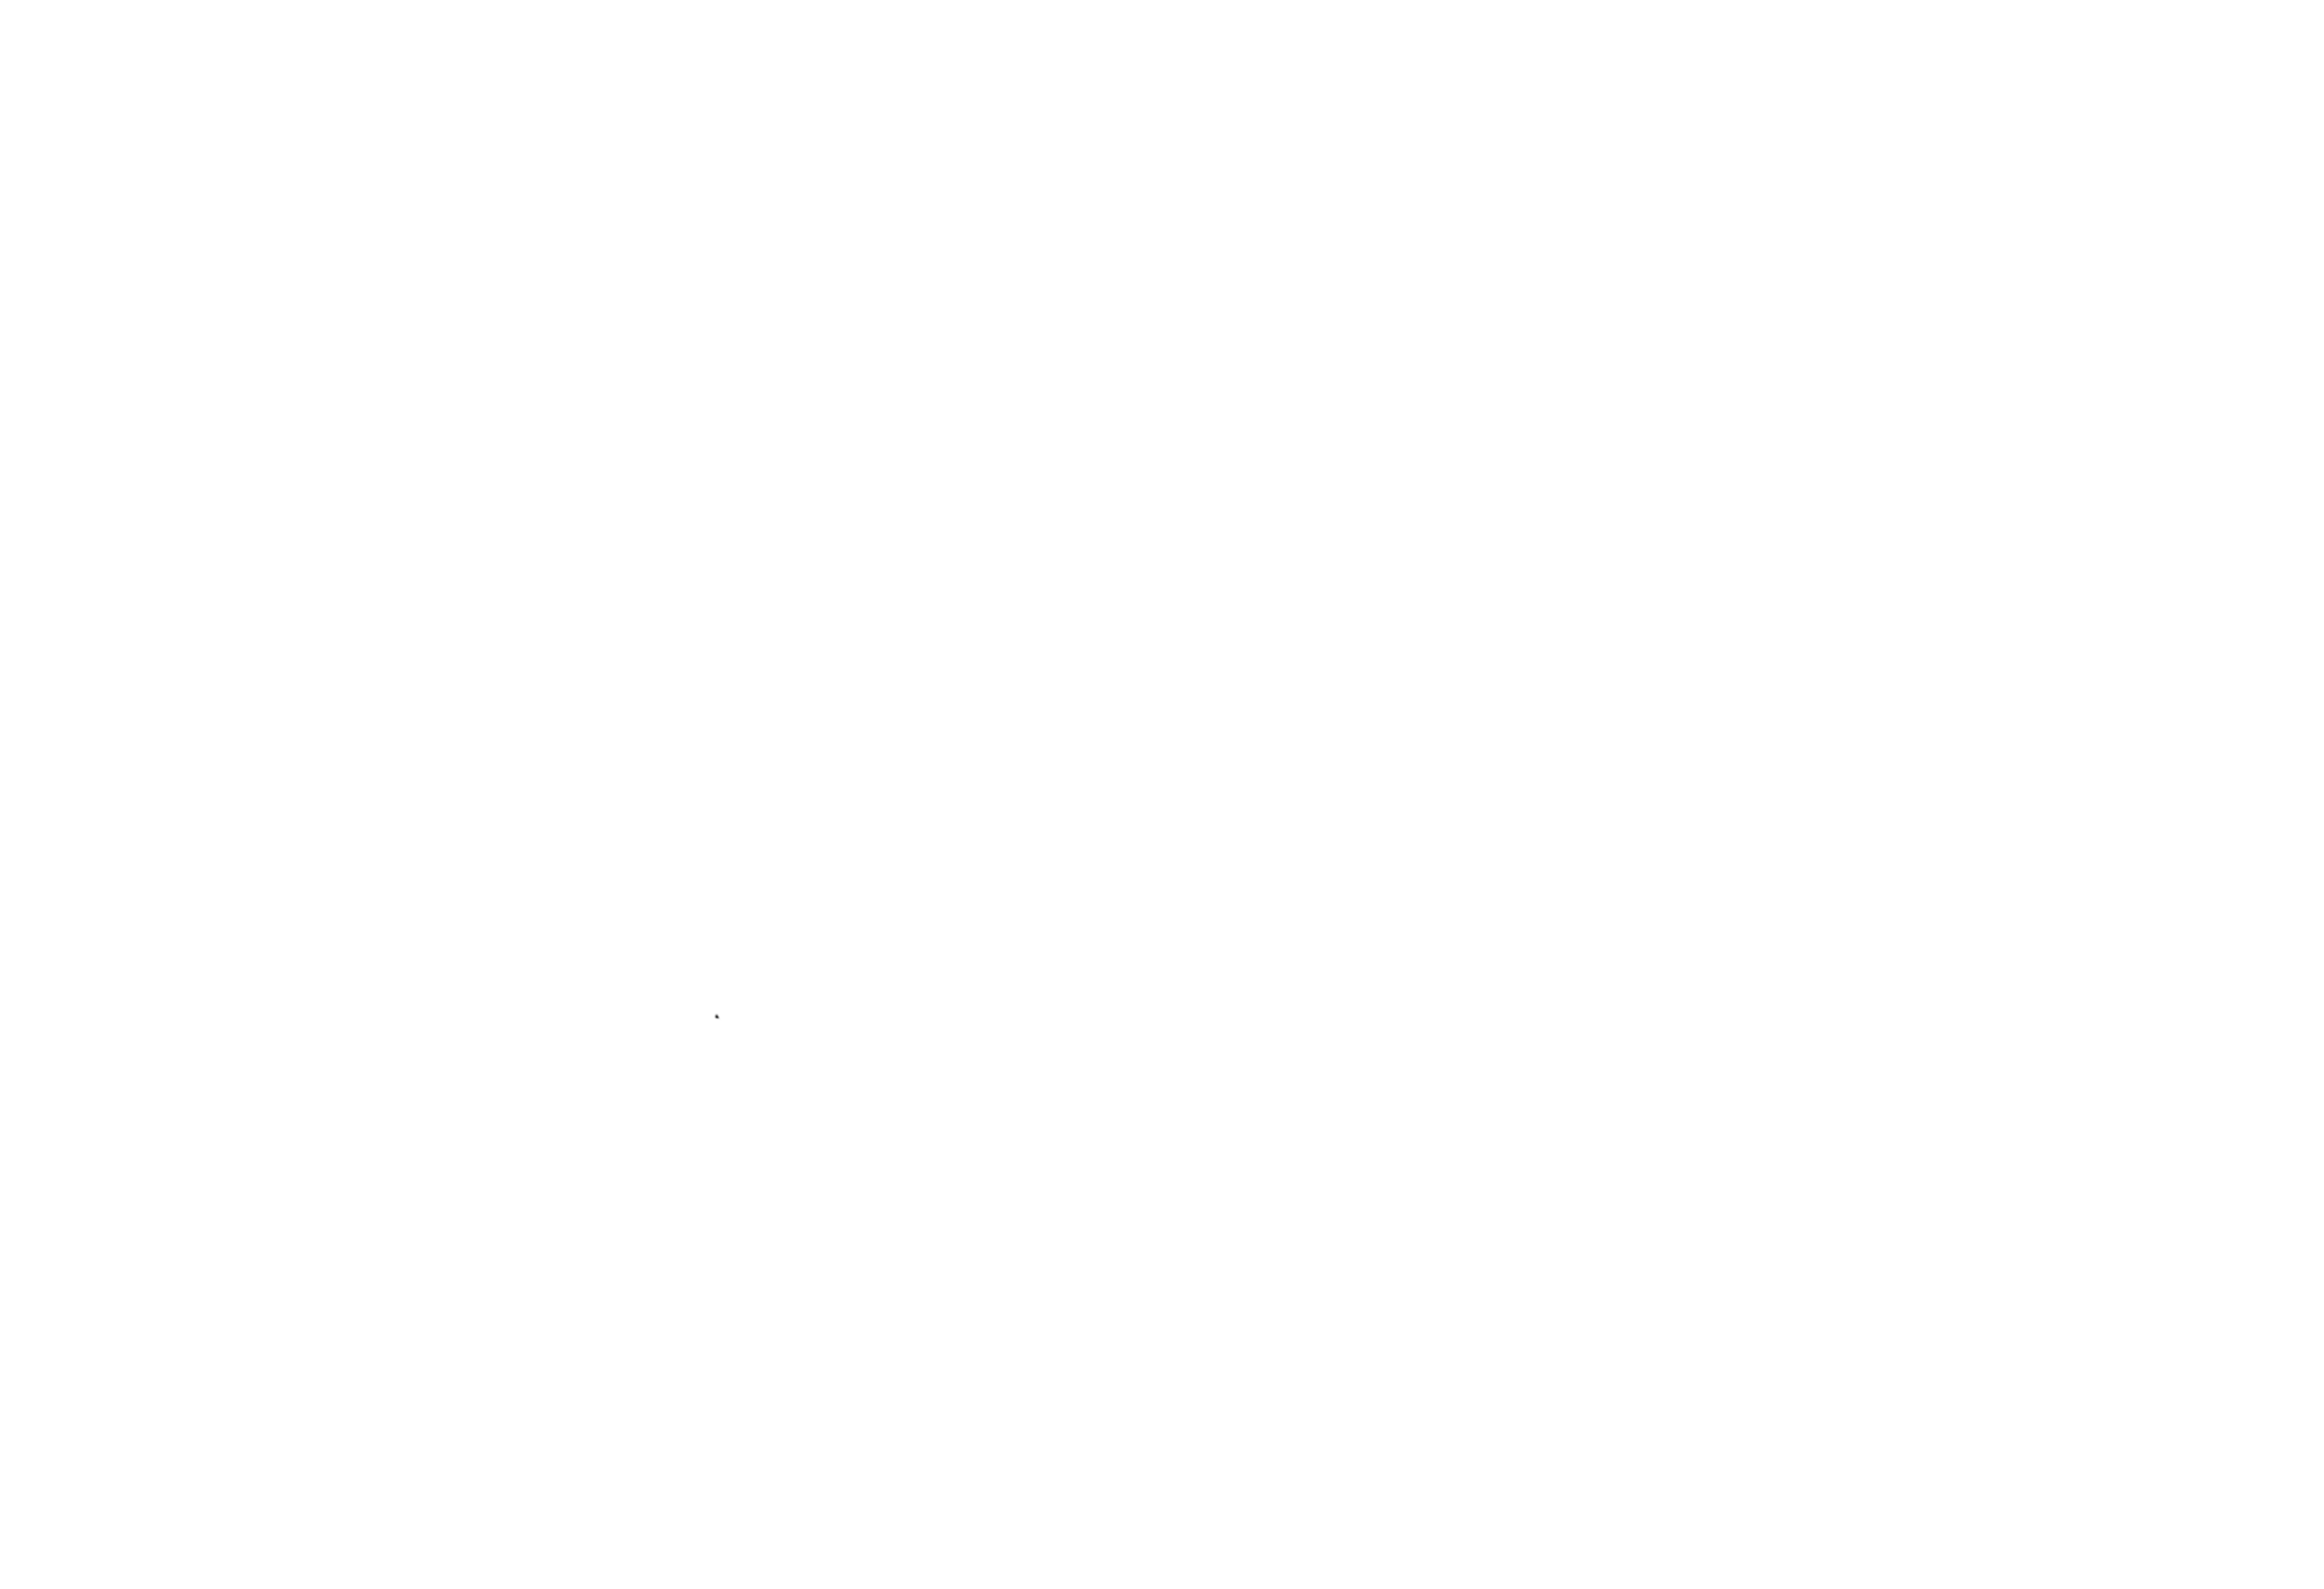 Lift Off Sessions 2019 (white) Finalist